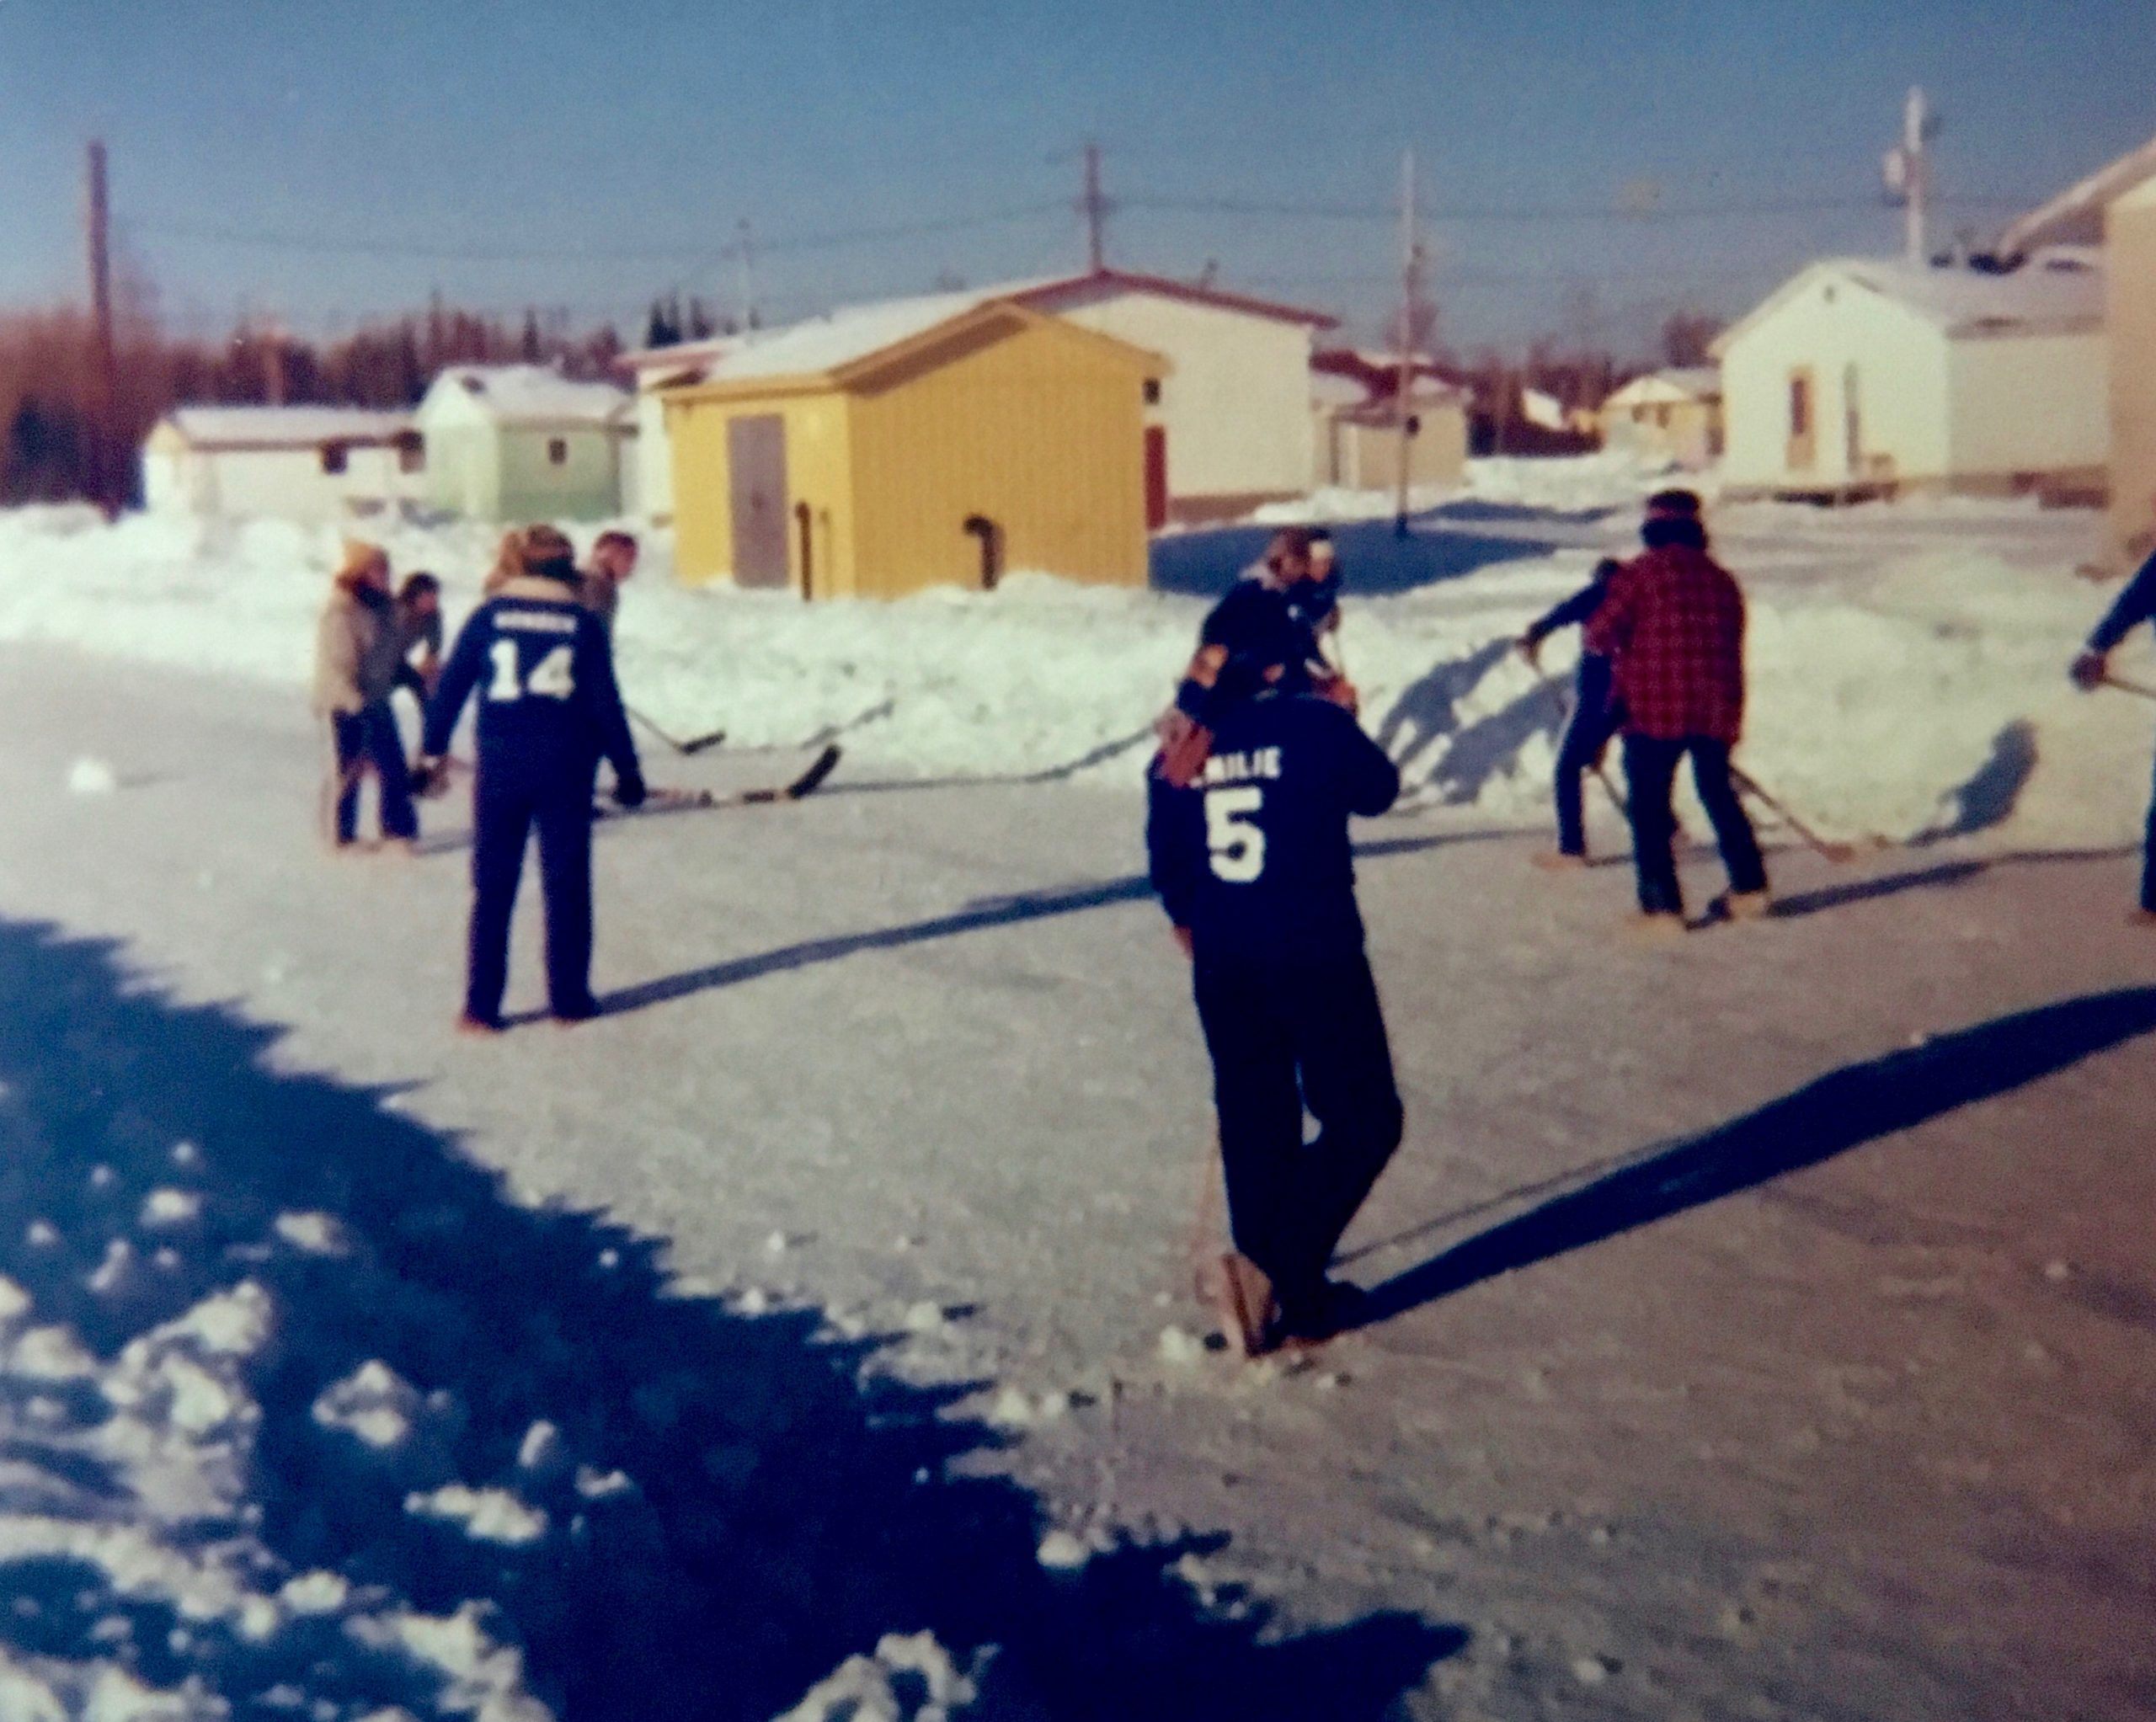 Anicinabek youth playing field hockey in the streets of the community. The road is snowy and snow lines the driveways. We can see some houses around. Picture in color.